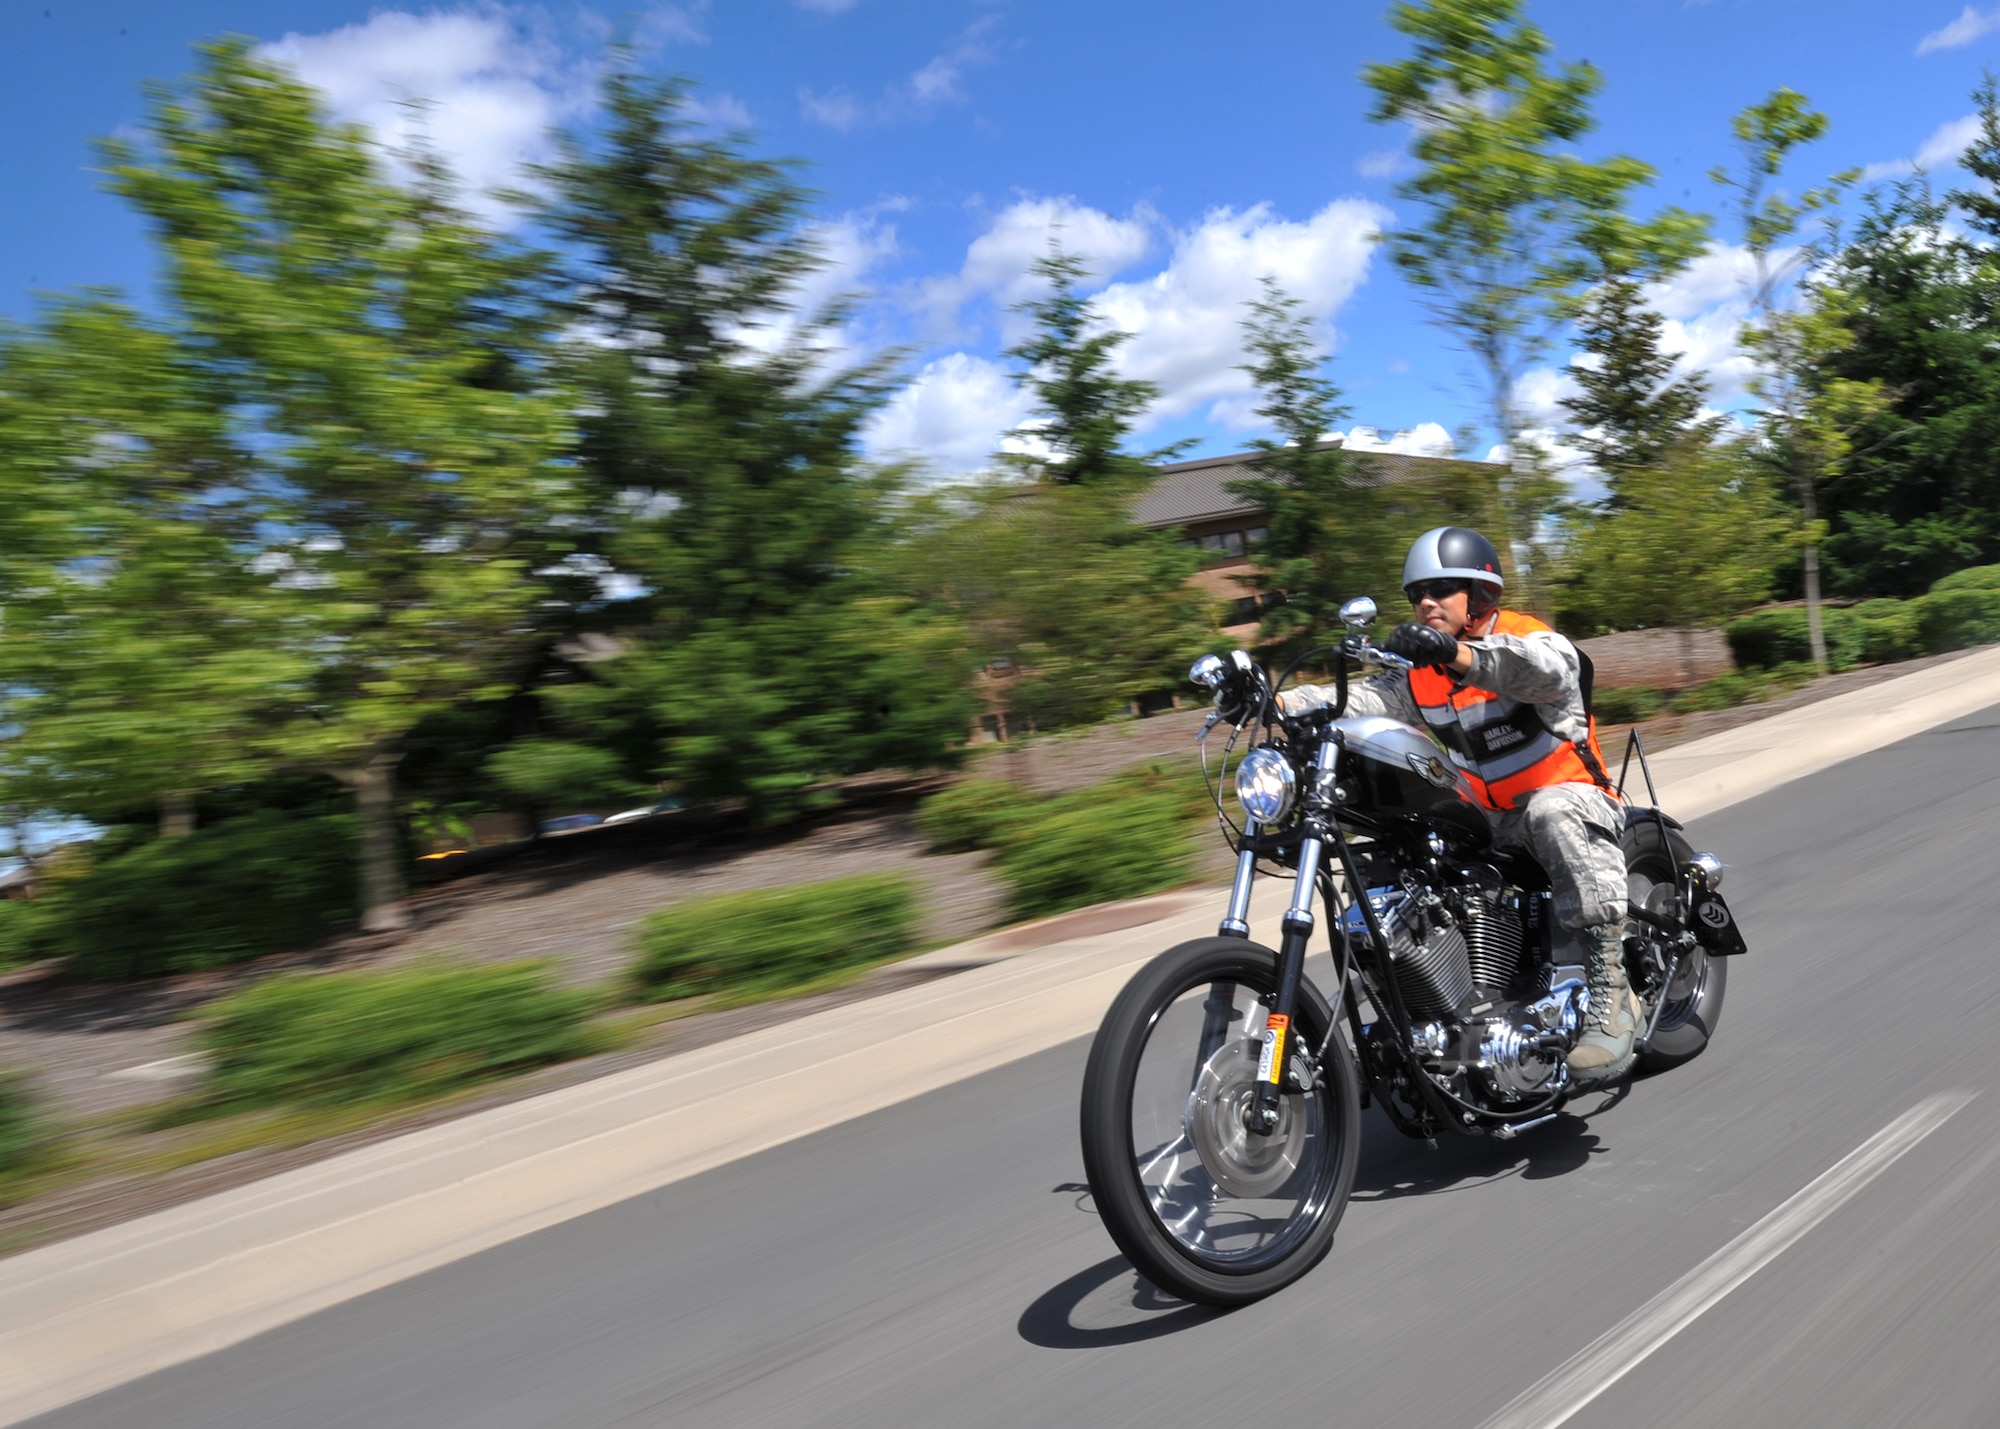 Personal protective equipment required for Air Force motorcycle riders includes full-fingered gloves, over-the-ankle footwear, eye protection and a Department of Transportation-approved helmet.